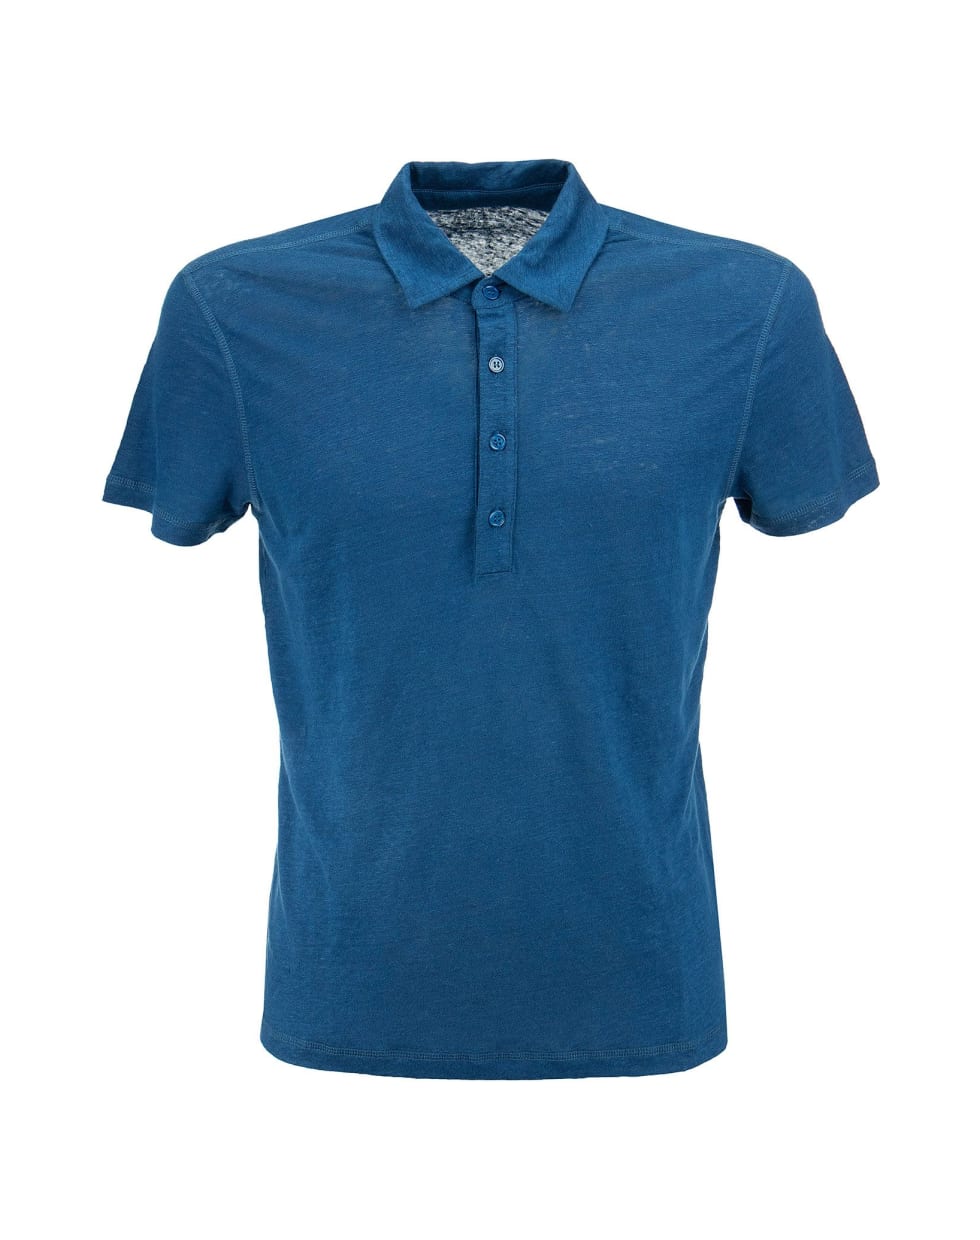 Majestic Filatures Linen Polo APROVEITE Shirt With Short Sleeves - Indigo